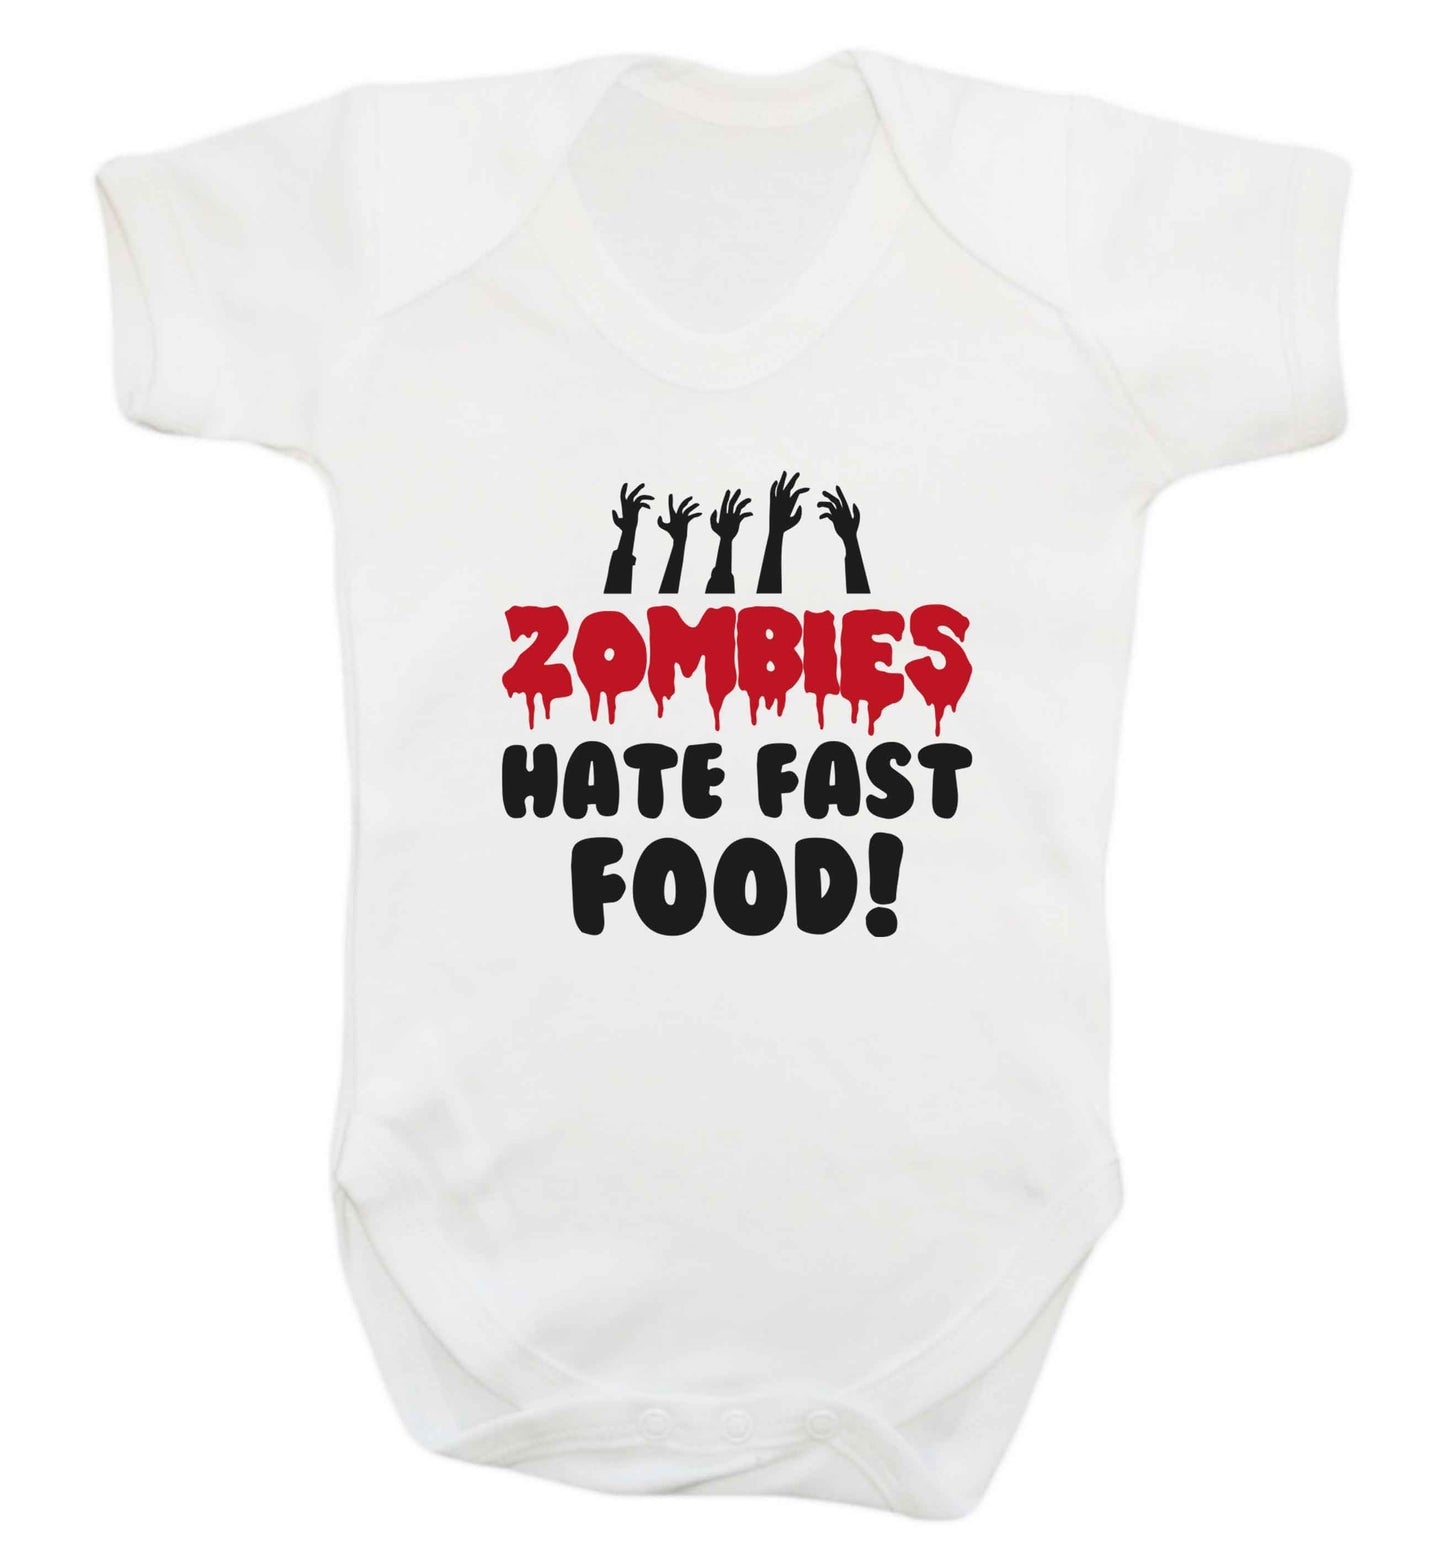 Zombies hate fast food baby vest white 18-24 months